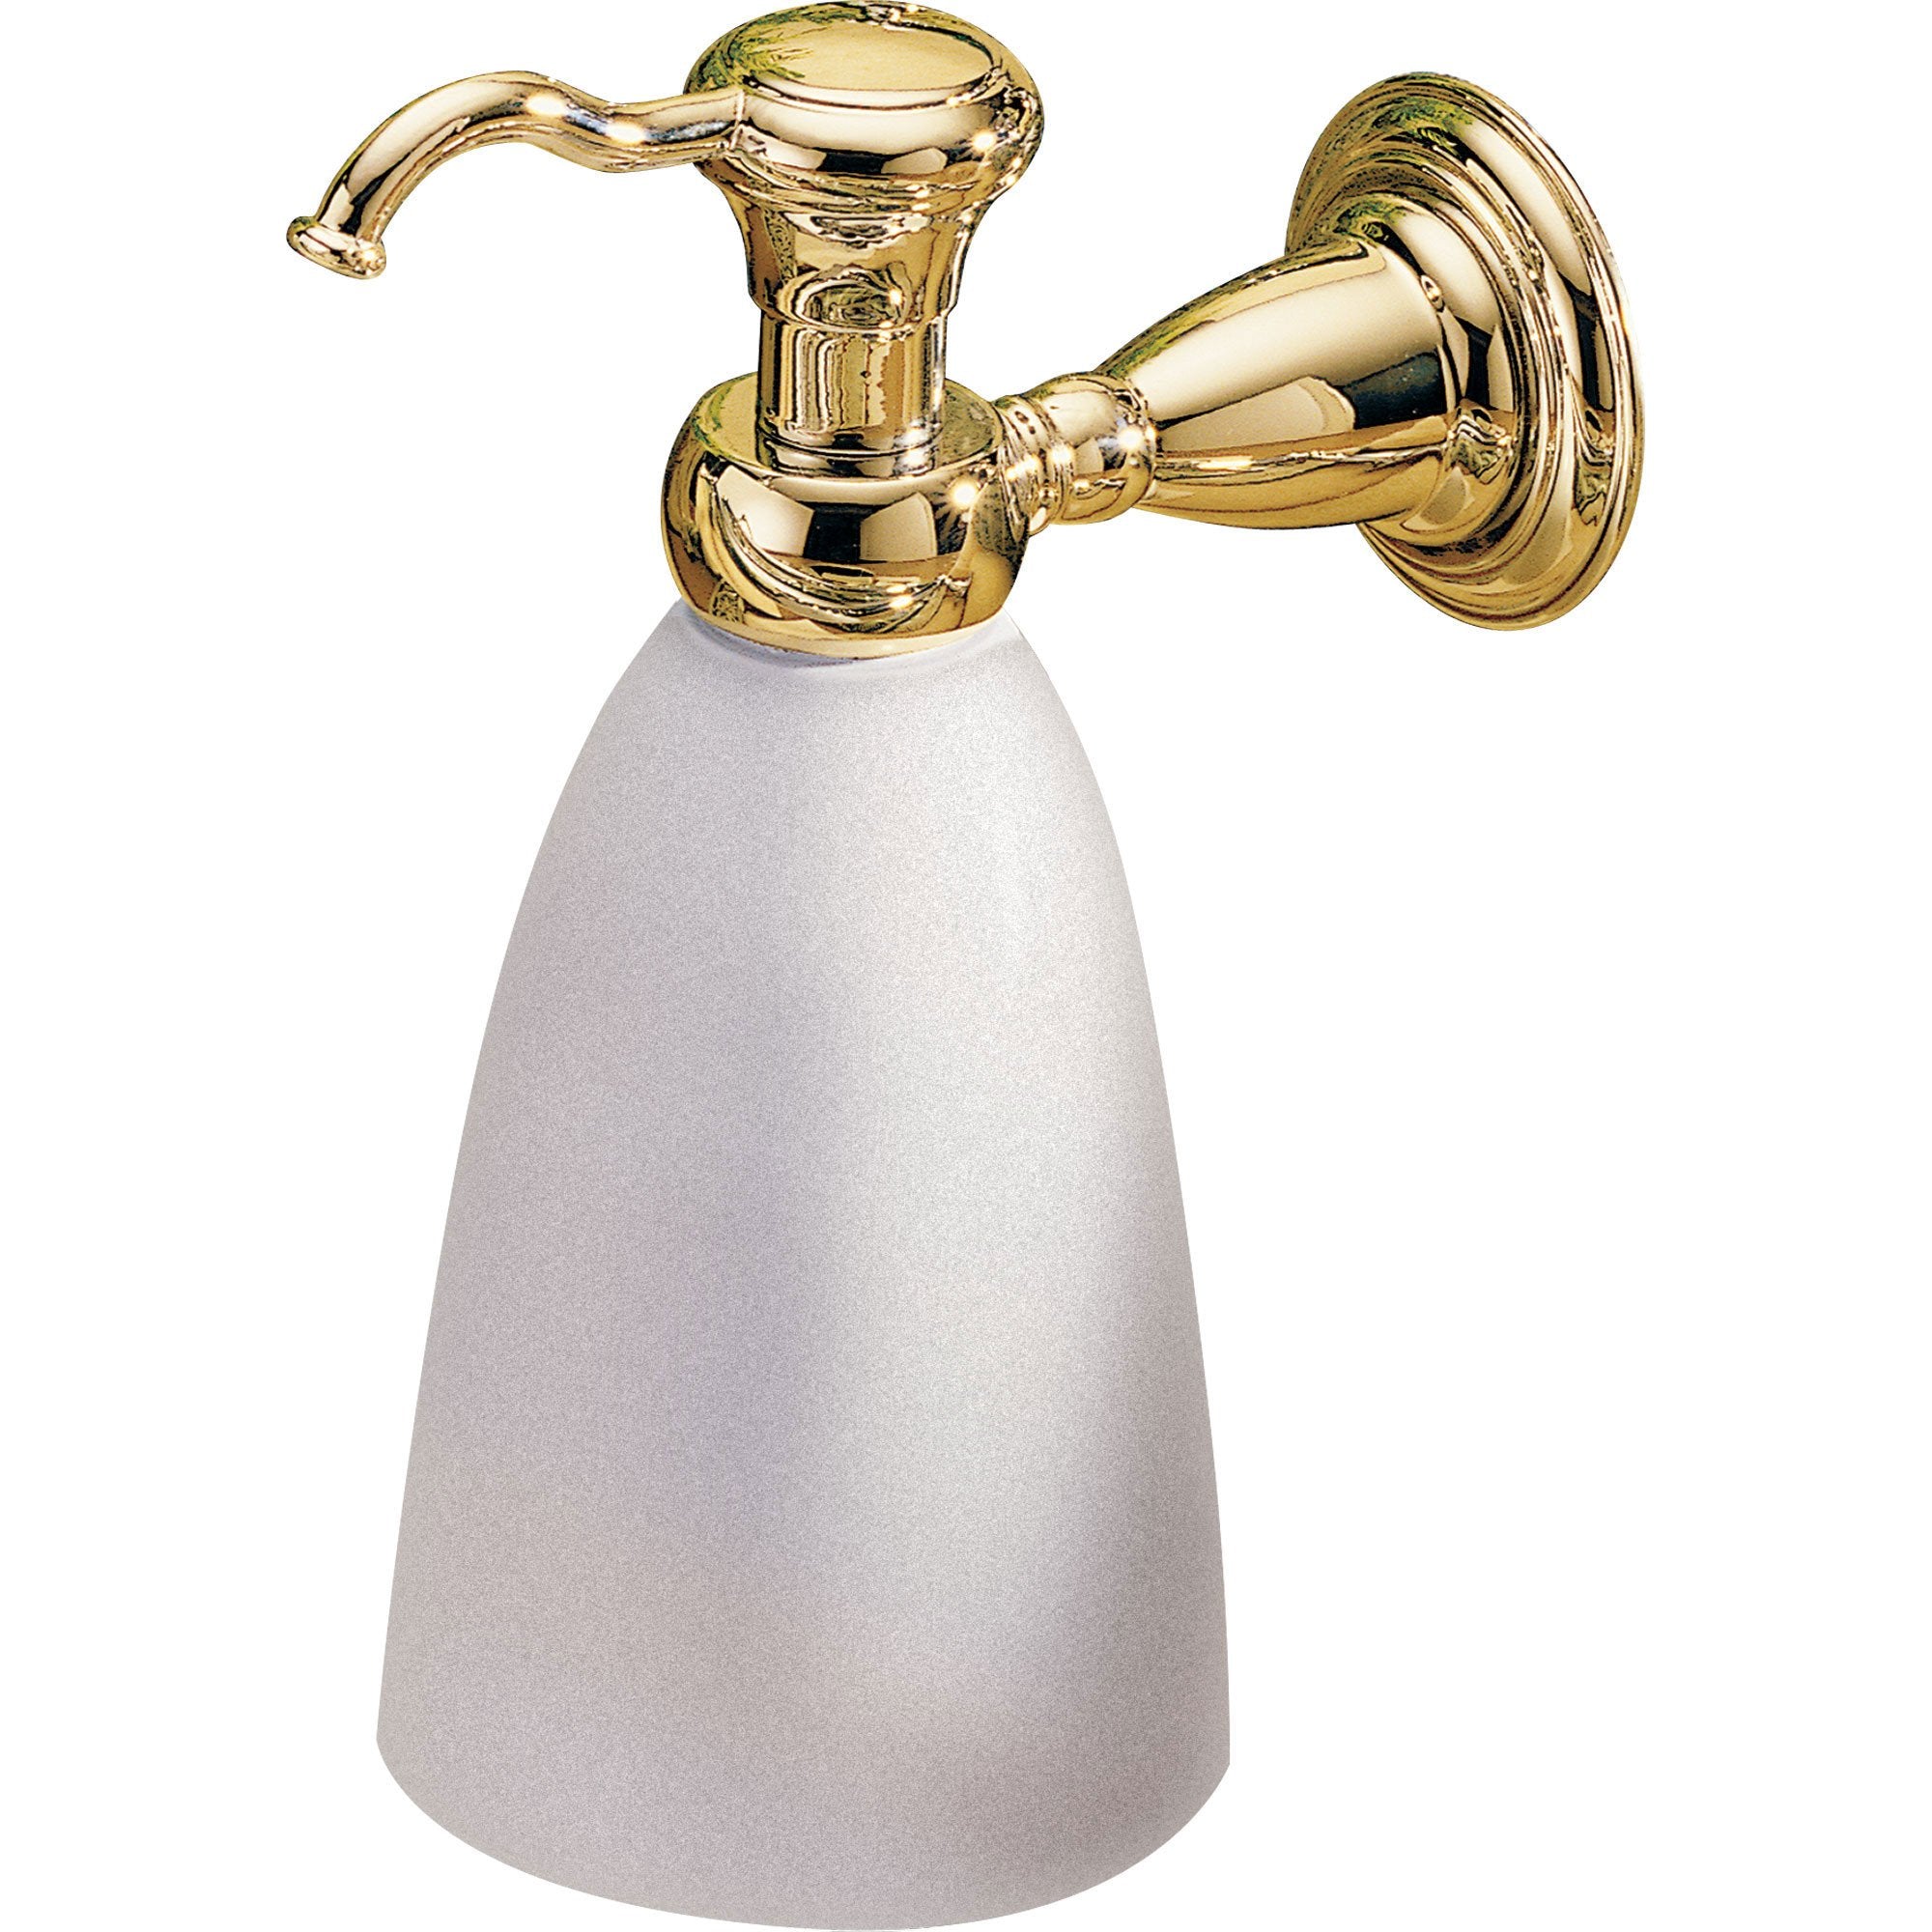 Delta Victorian Traditional Polished Brass Wall-Mount Soap Dispenser 387397